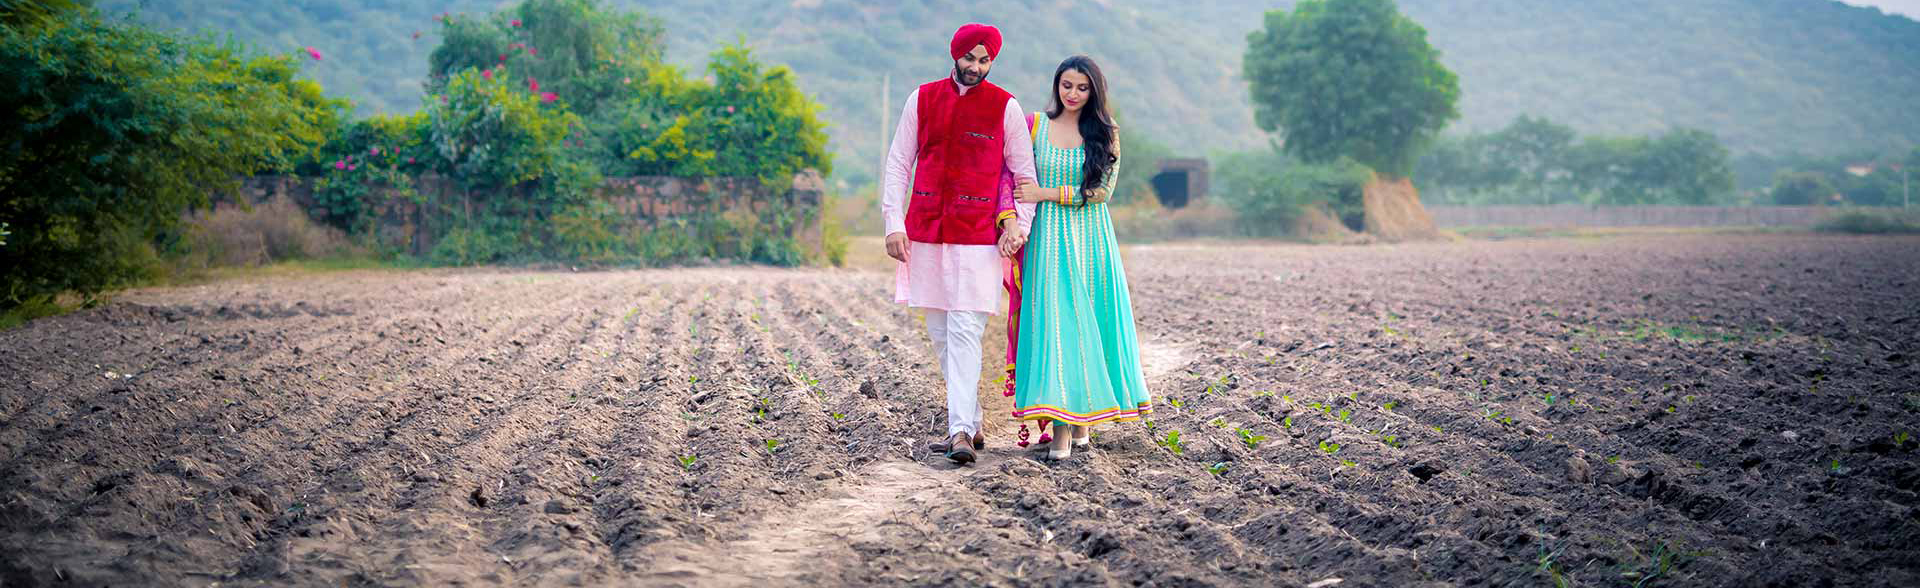 Best candid pre wedding shoot in Tikli Bottom, Gurgaon, India for the most crazy couple